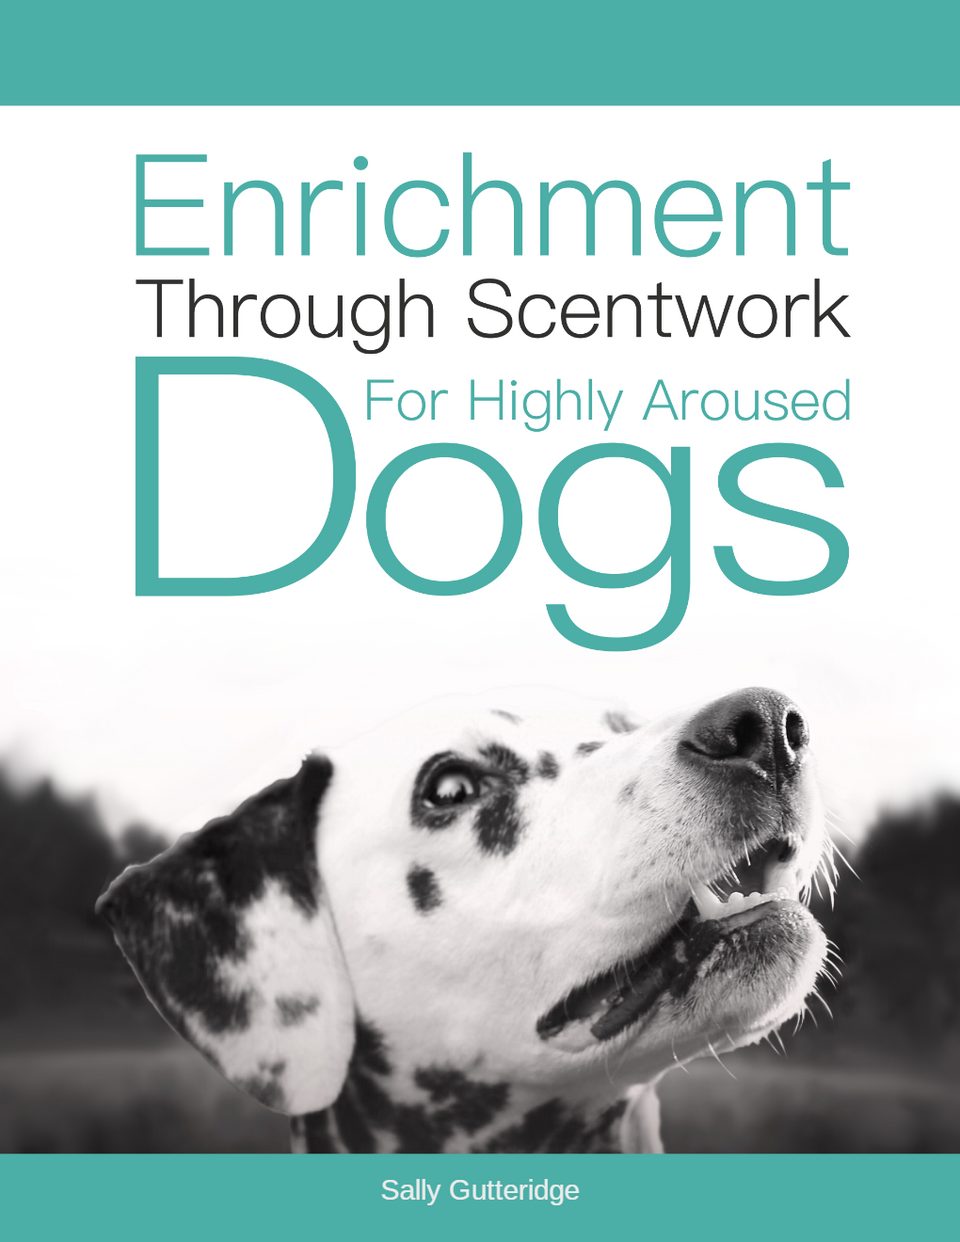 USE CODE: KAD100 - Enrichment Through Scentwork for Highly Aroused Dogs by Sally Gutteridge